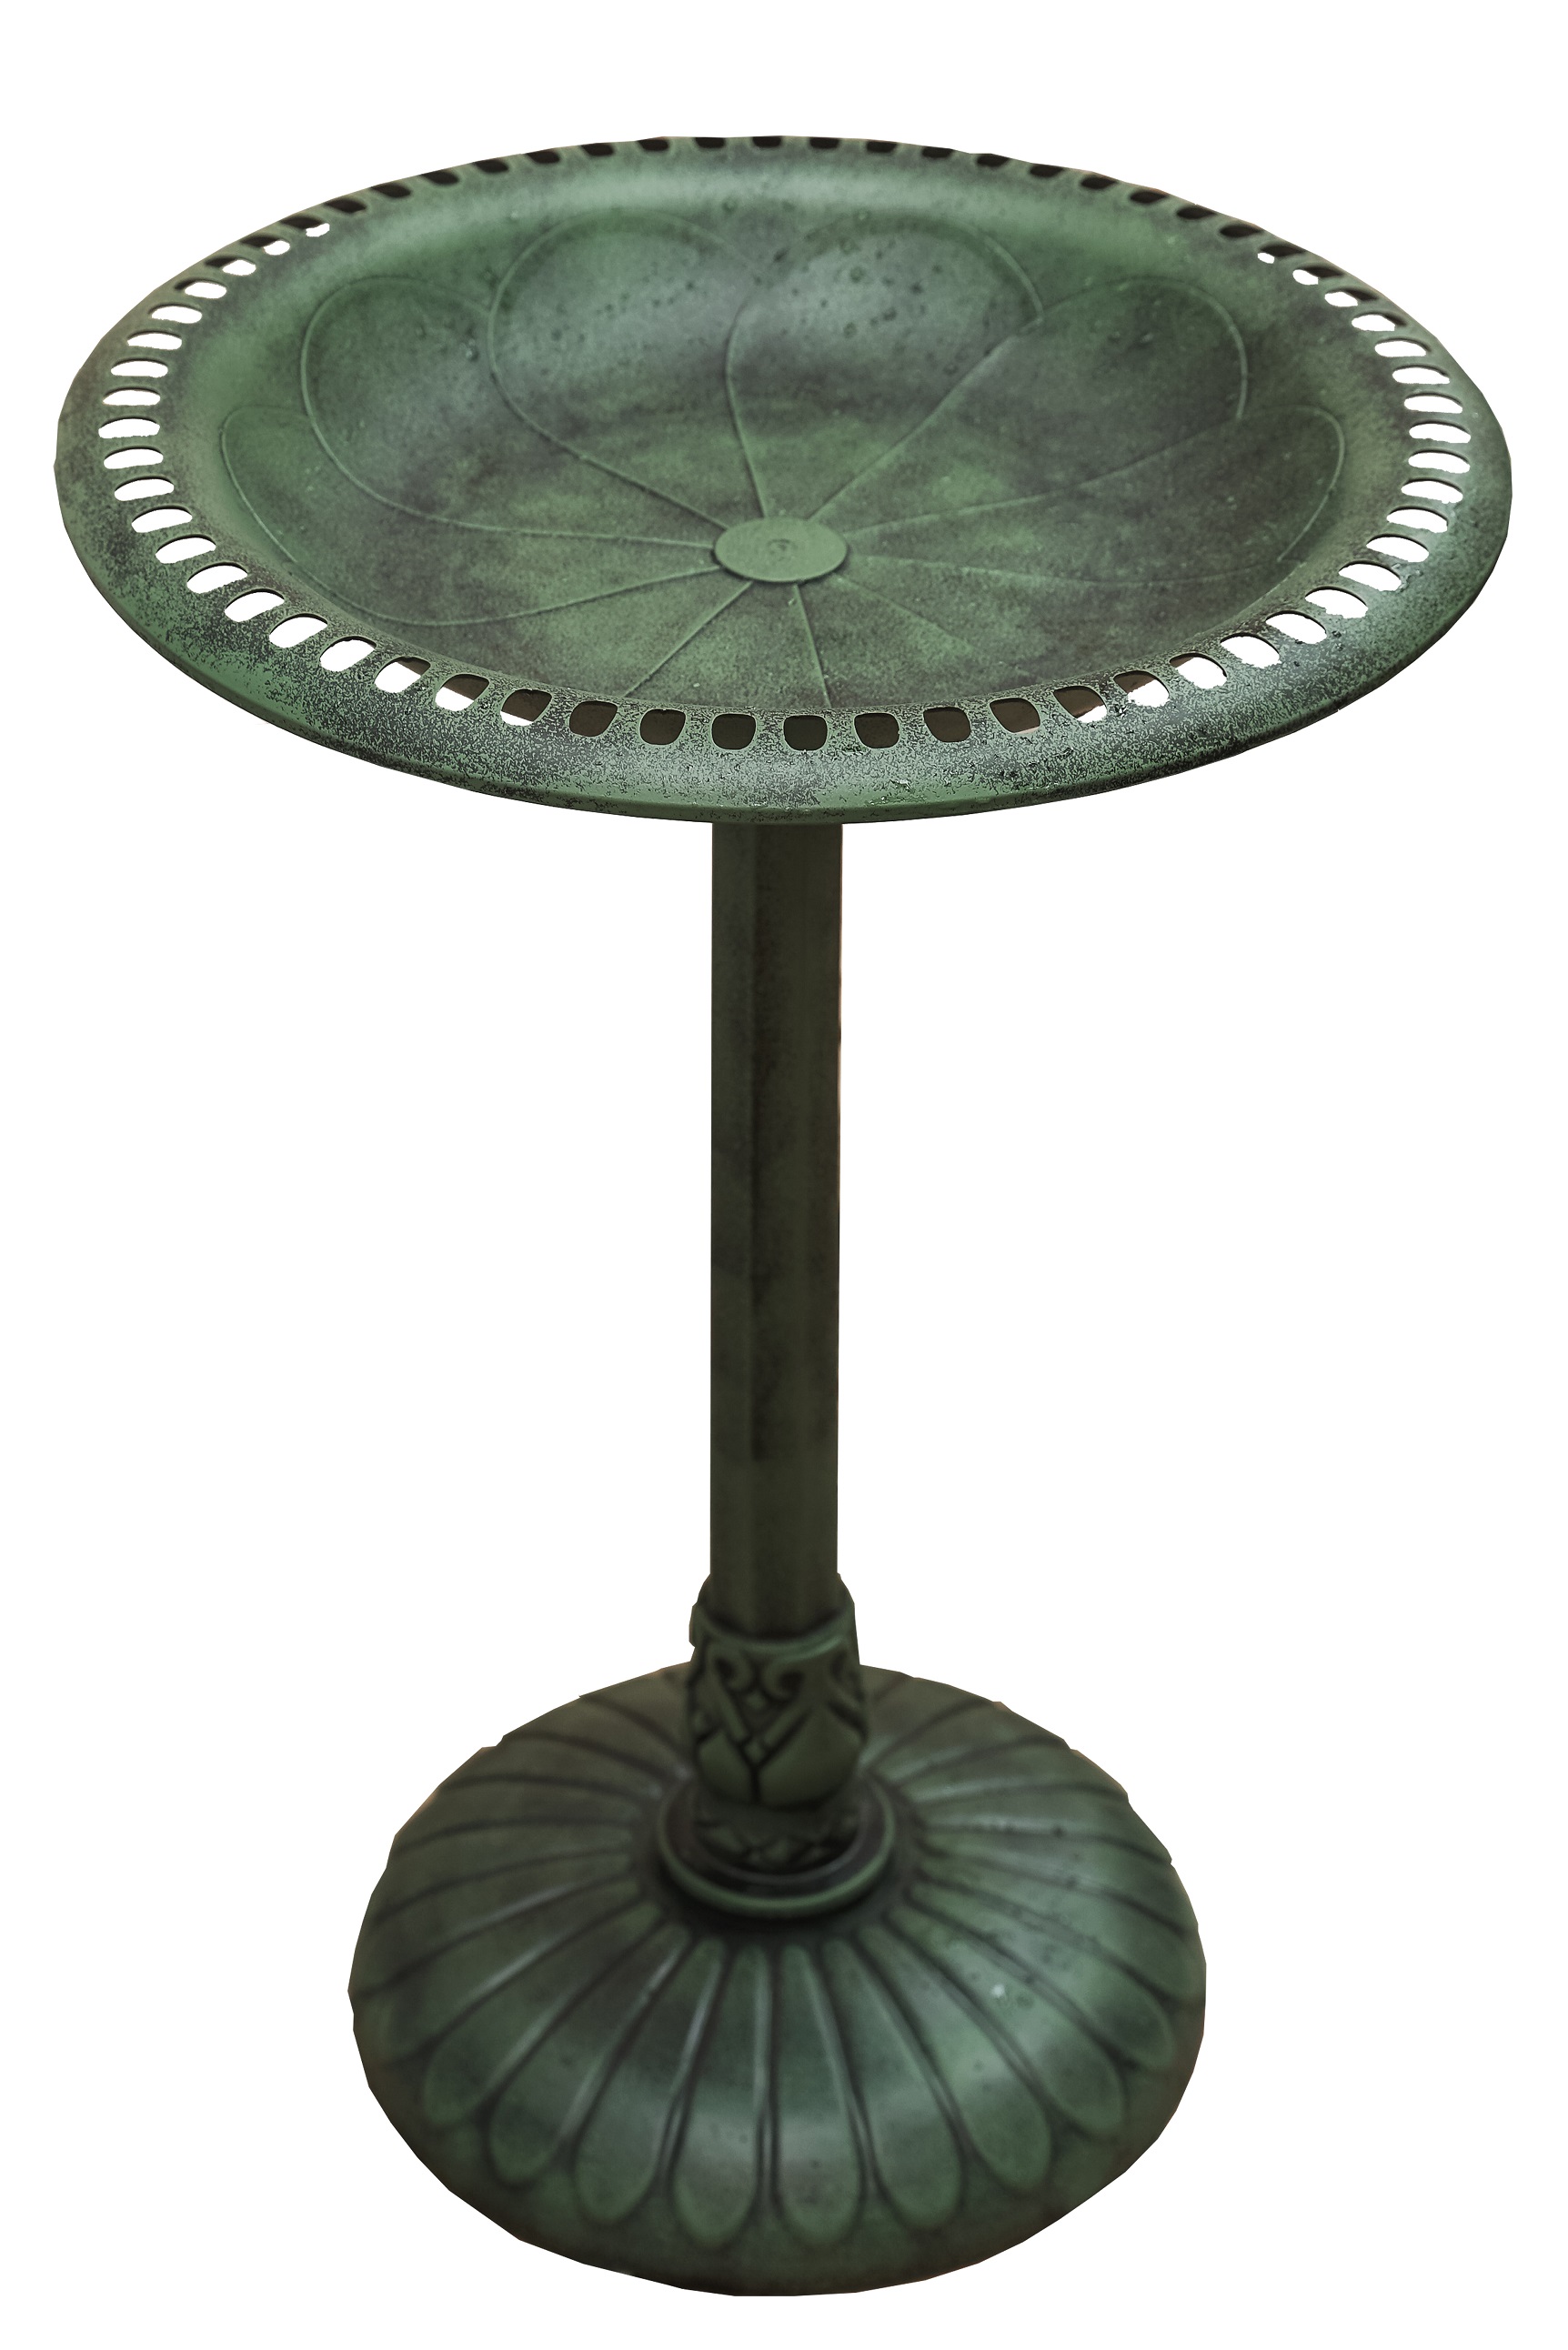 Enhance your outdoor space with our collection of bird baths and feeders! Choose from lightweight, green, and flower design options to attract birds to your garden.